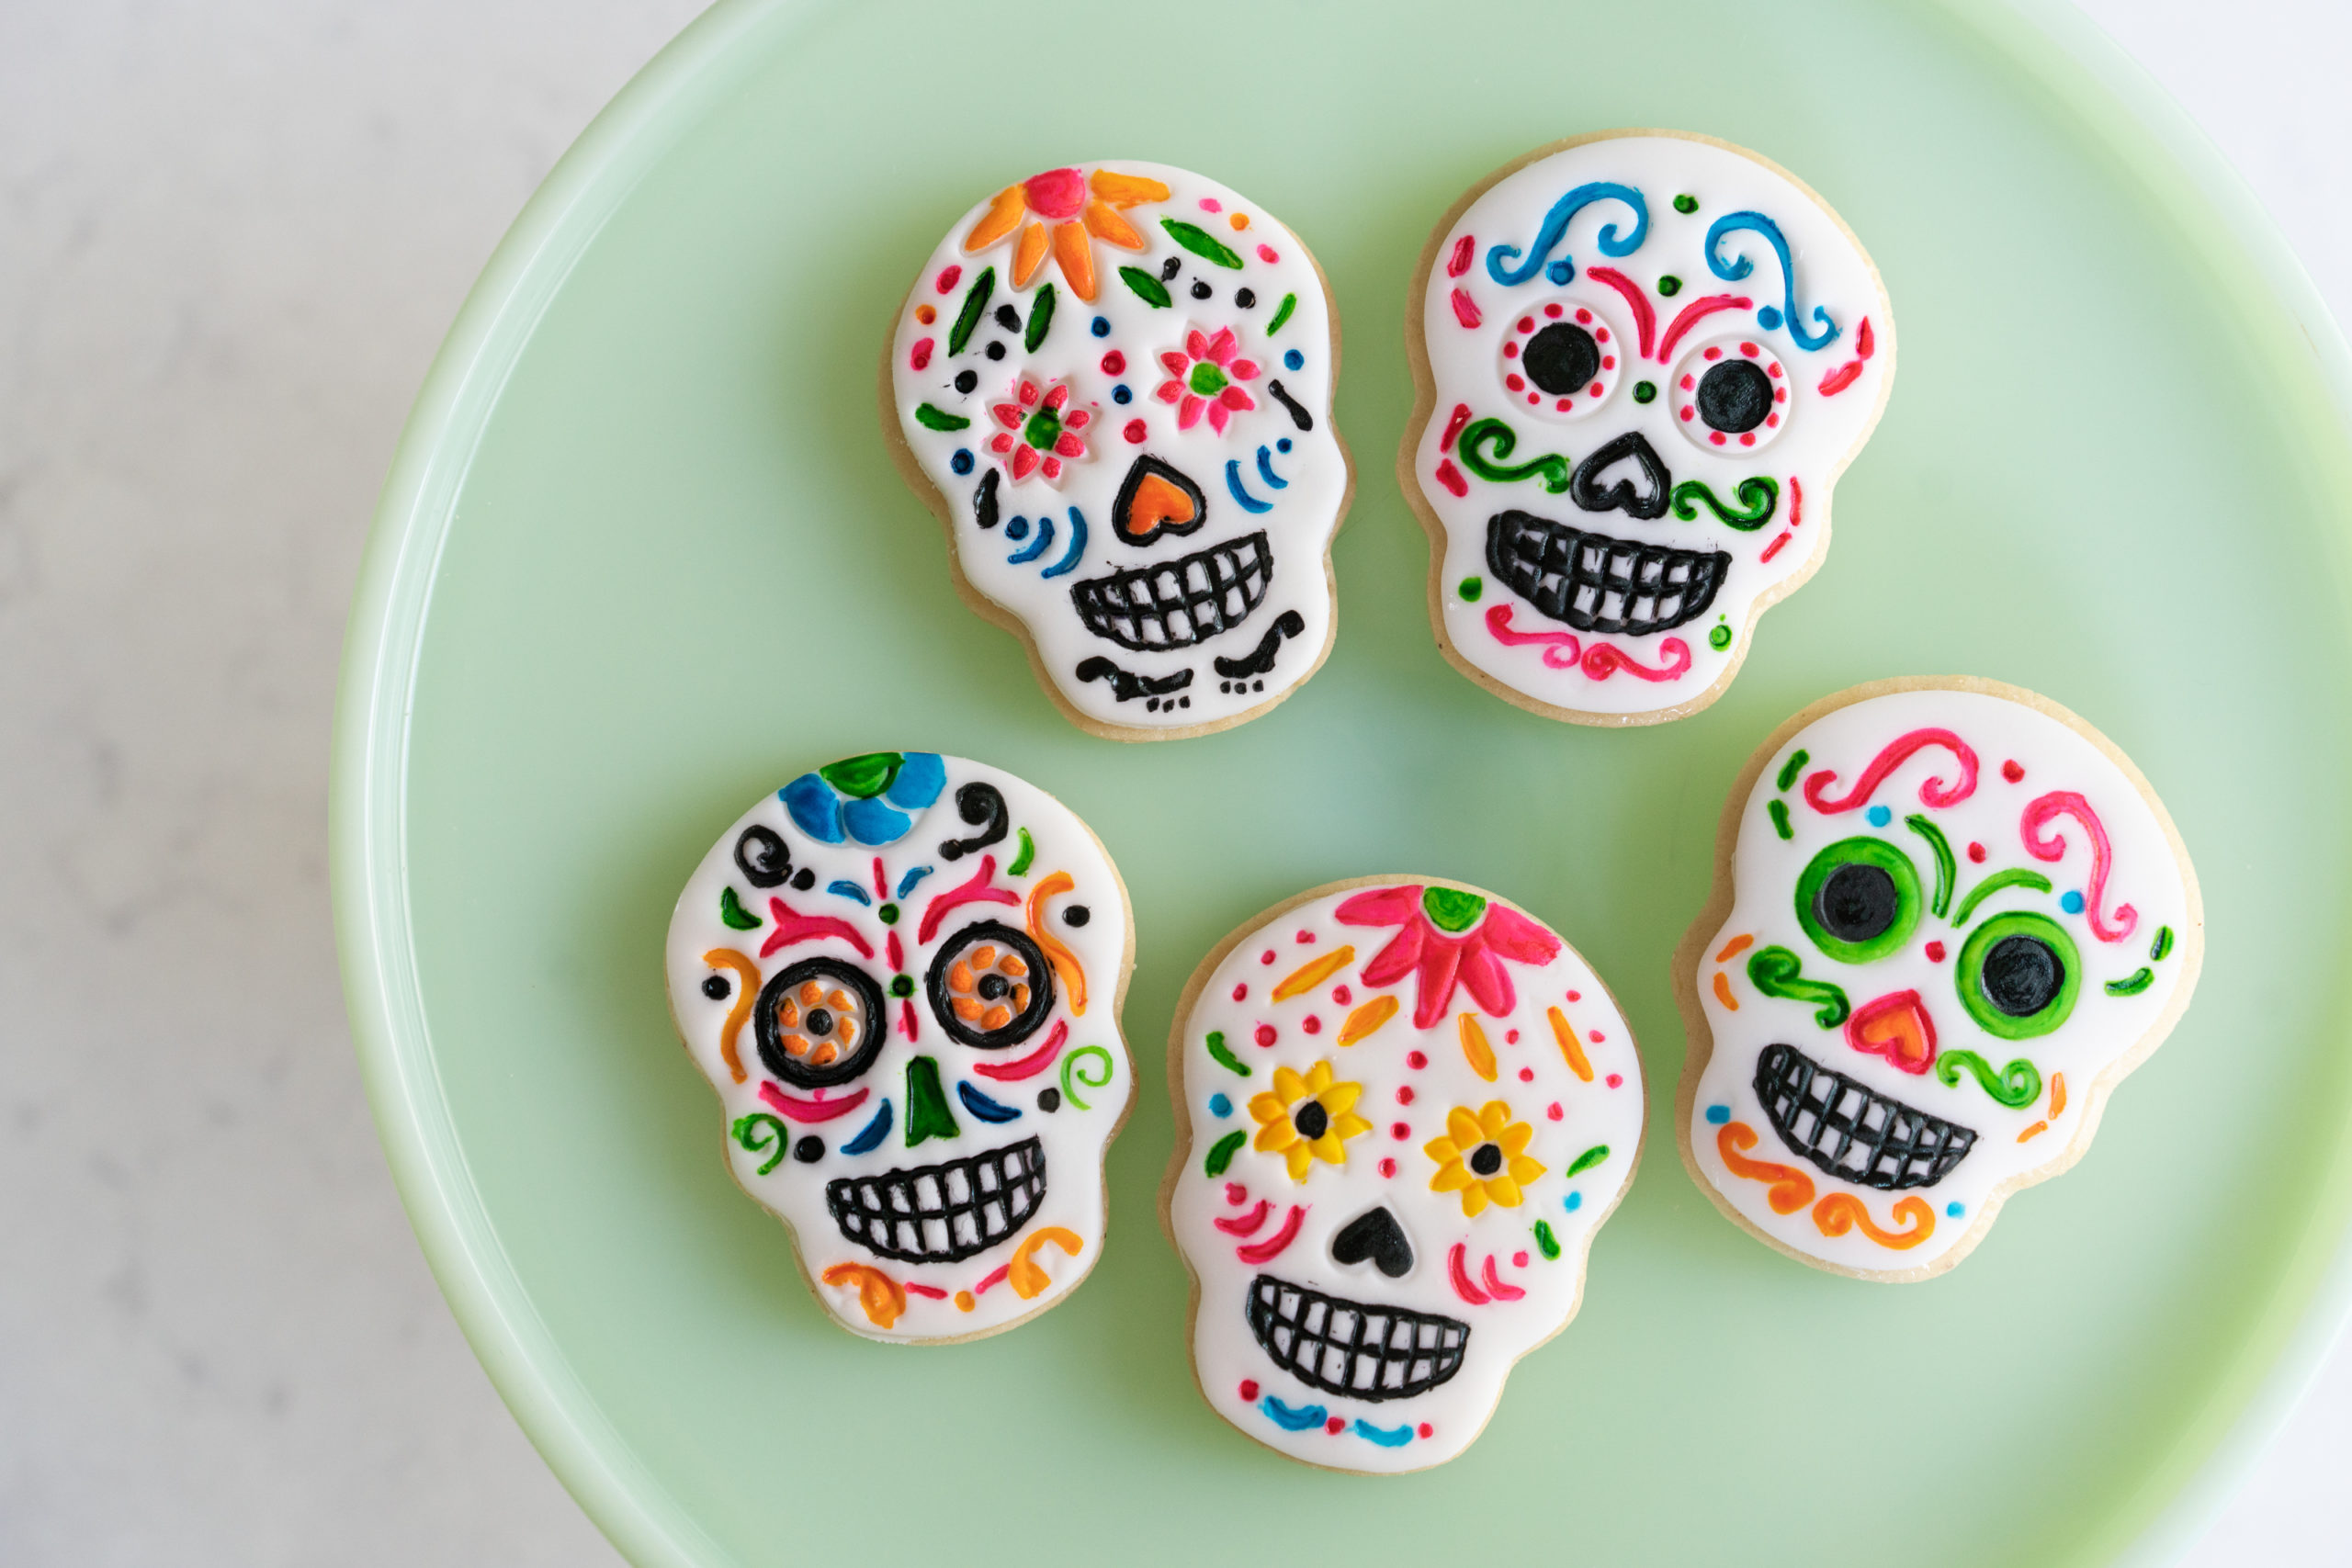 skull cookies with bright colors and flowers painted on them for day of the dead